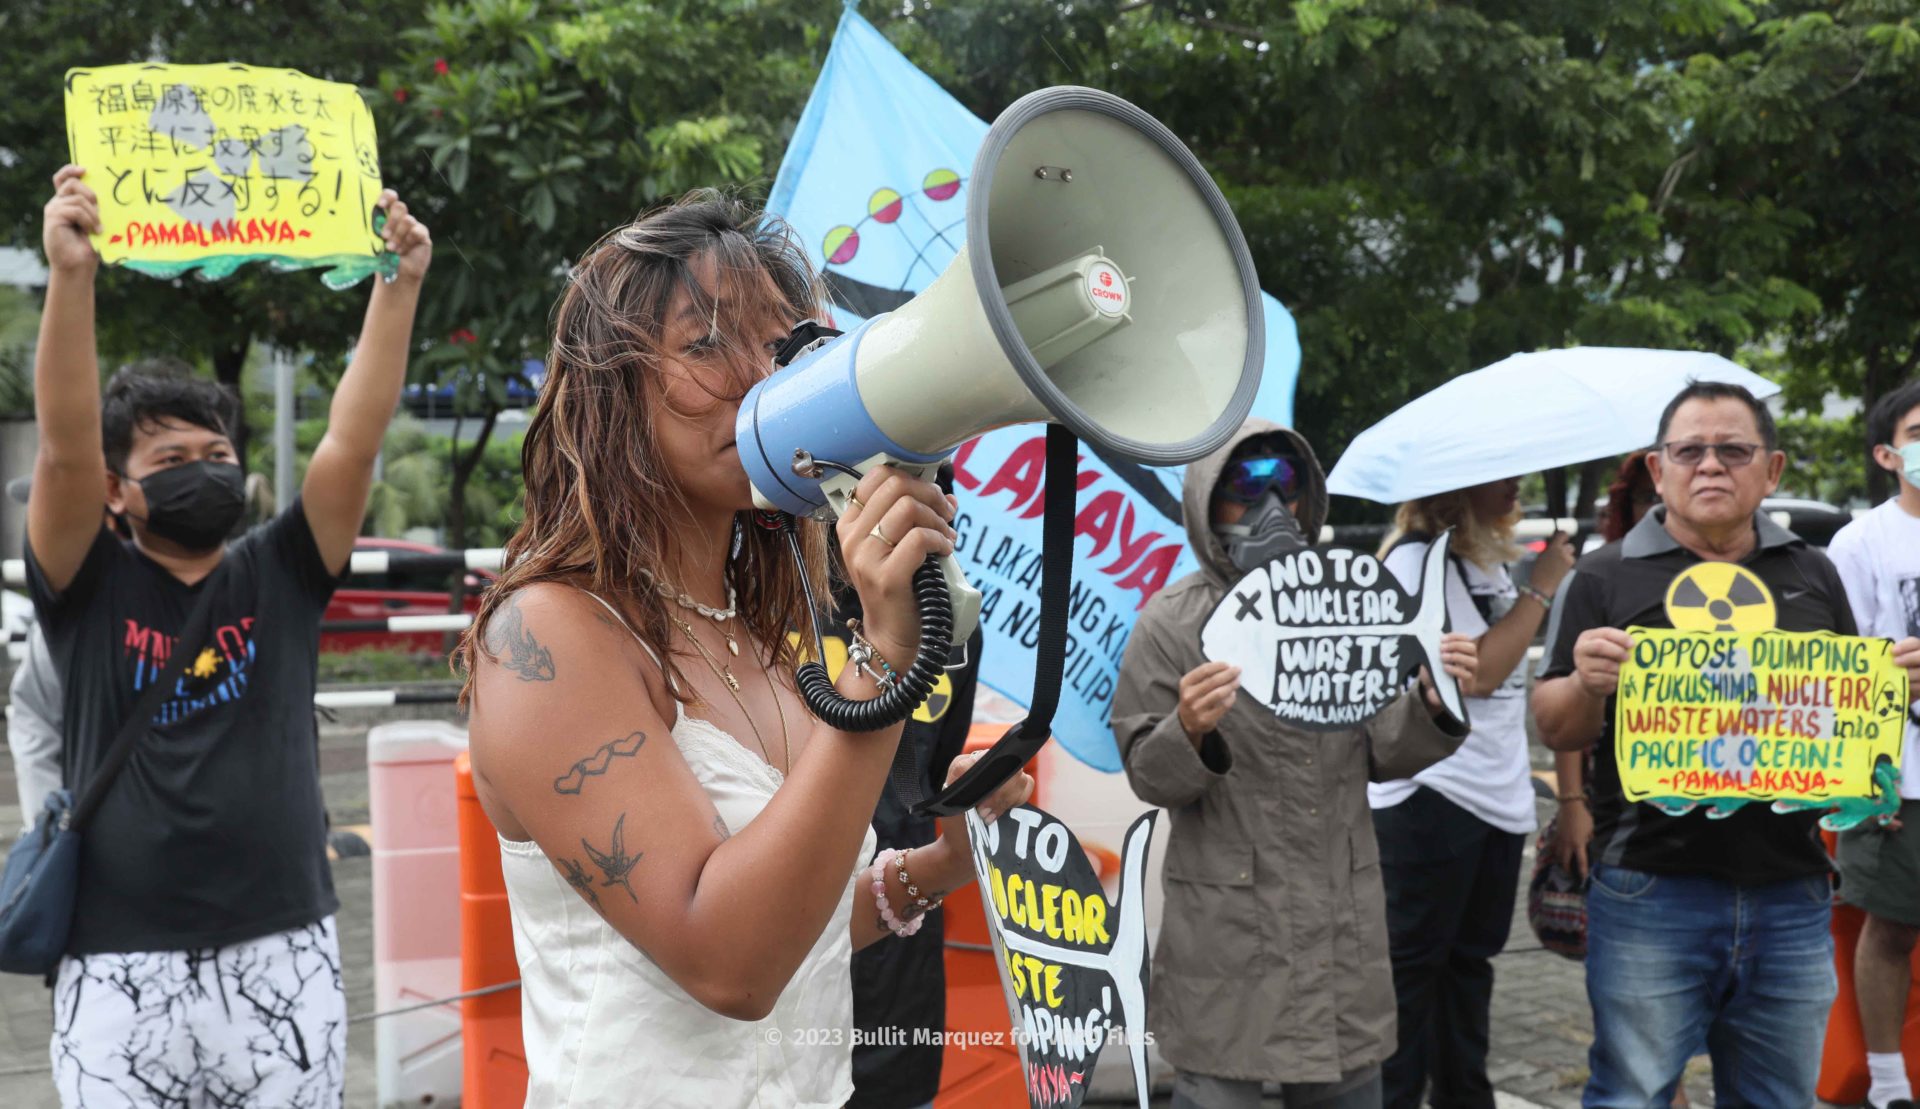 ‘No to Fukushima nuclear waste water’- protesters 4/5, Photo by Bullit Marquez for VERA Files